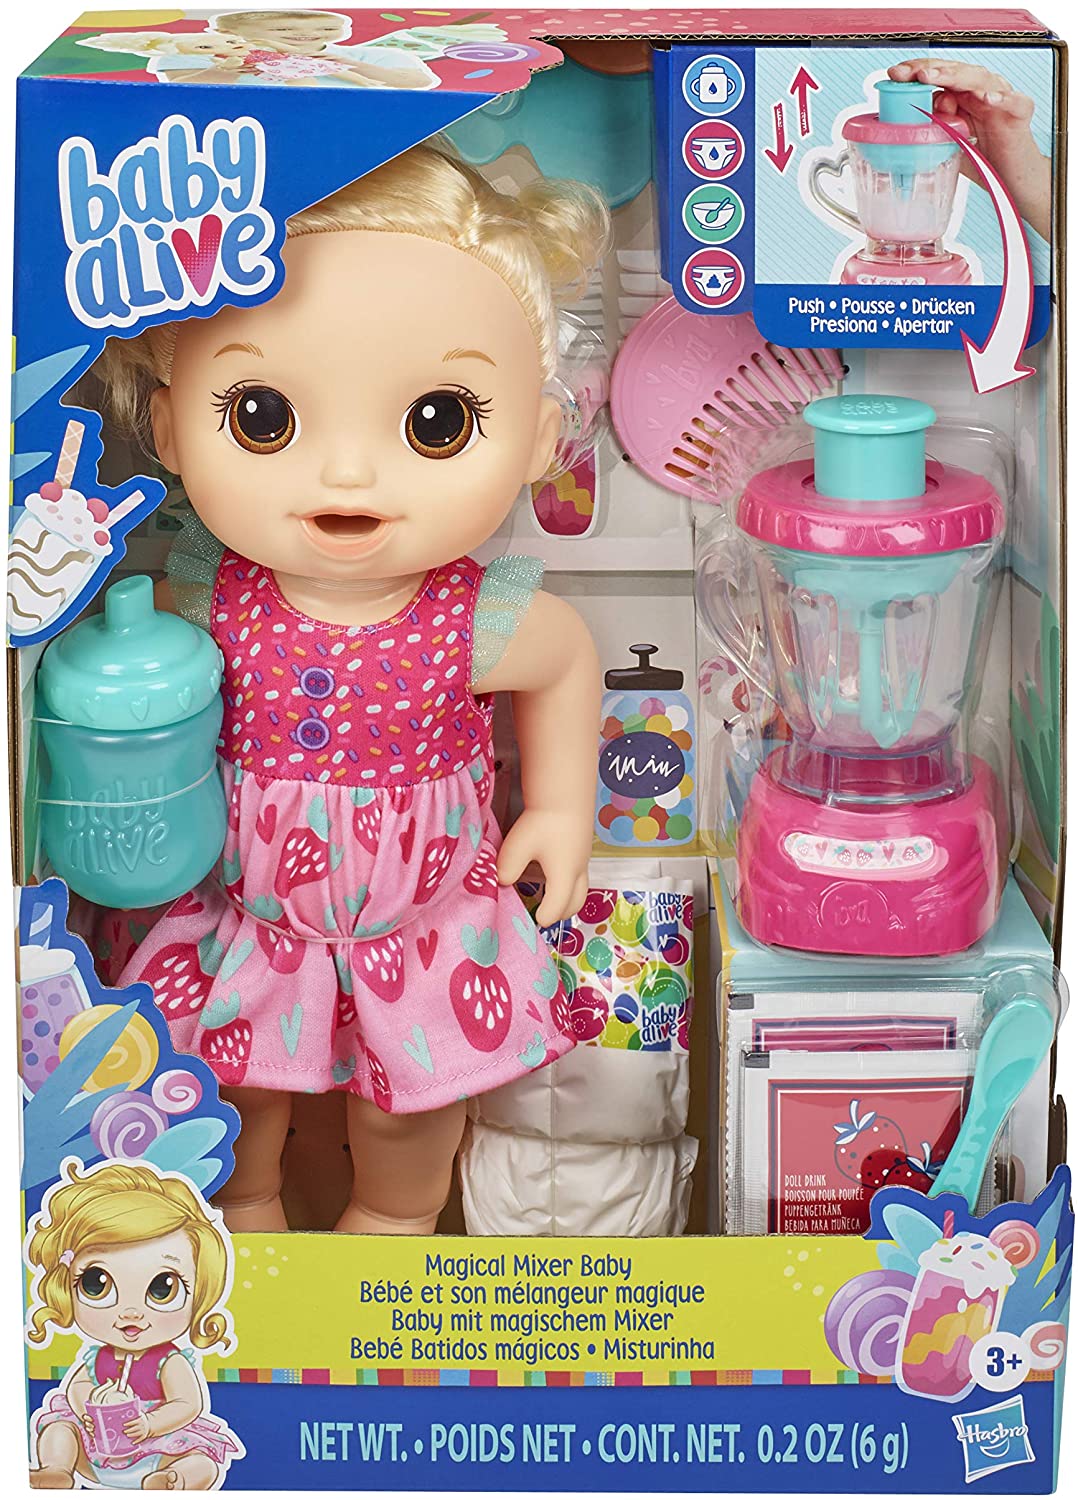 Baby Alive Mixer Baby Doll Strawberry Shake Blender Accessories, Drinks, Wets, Blonde Hair Toy for Children Aged 3 and Up –